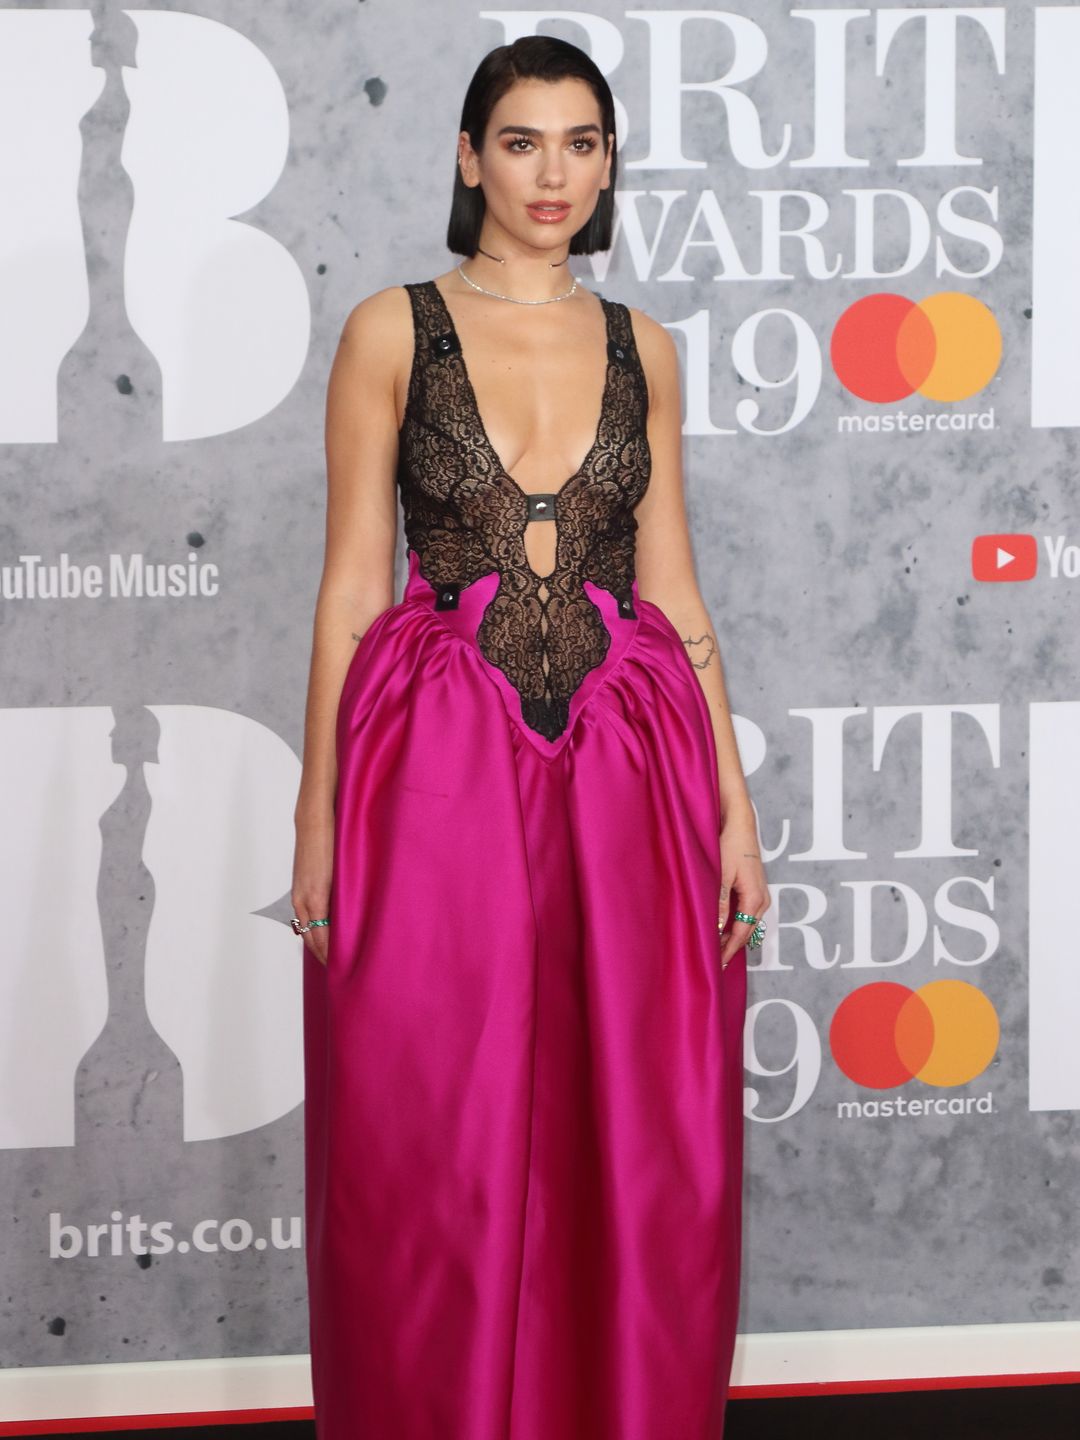 Dua Lipa seen on the red carpet during The BRIT Awards 2019 in a bright pink and black lace gown